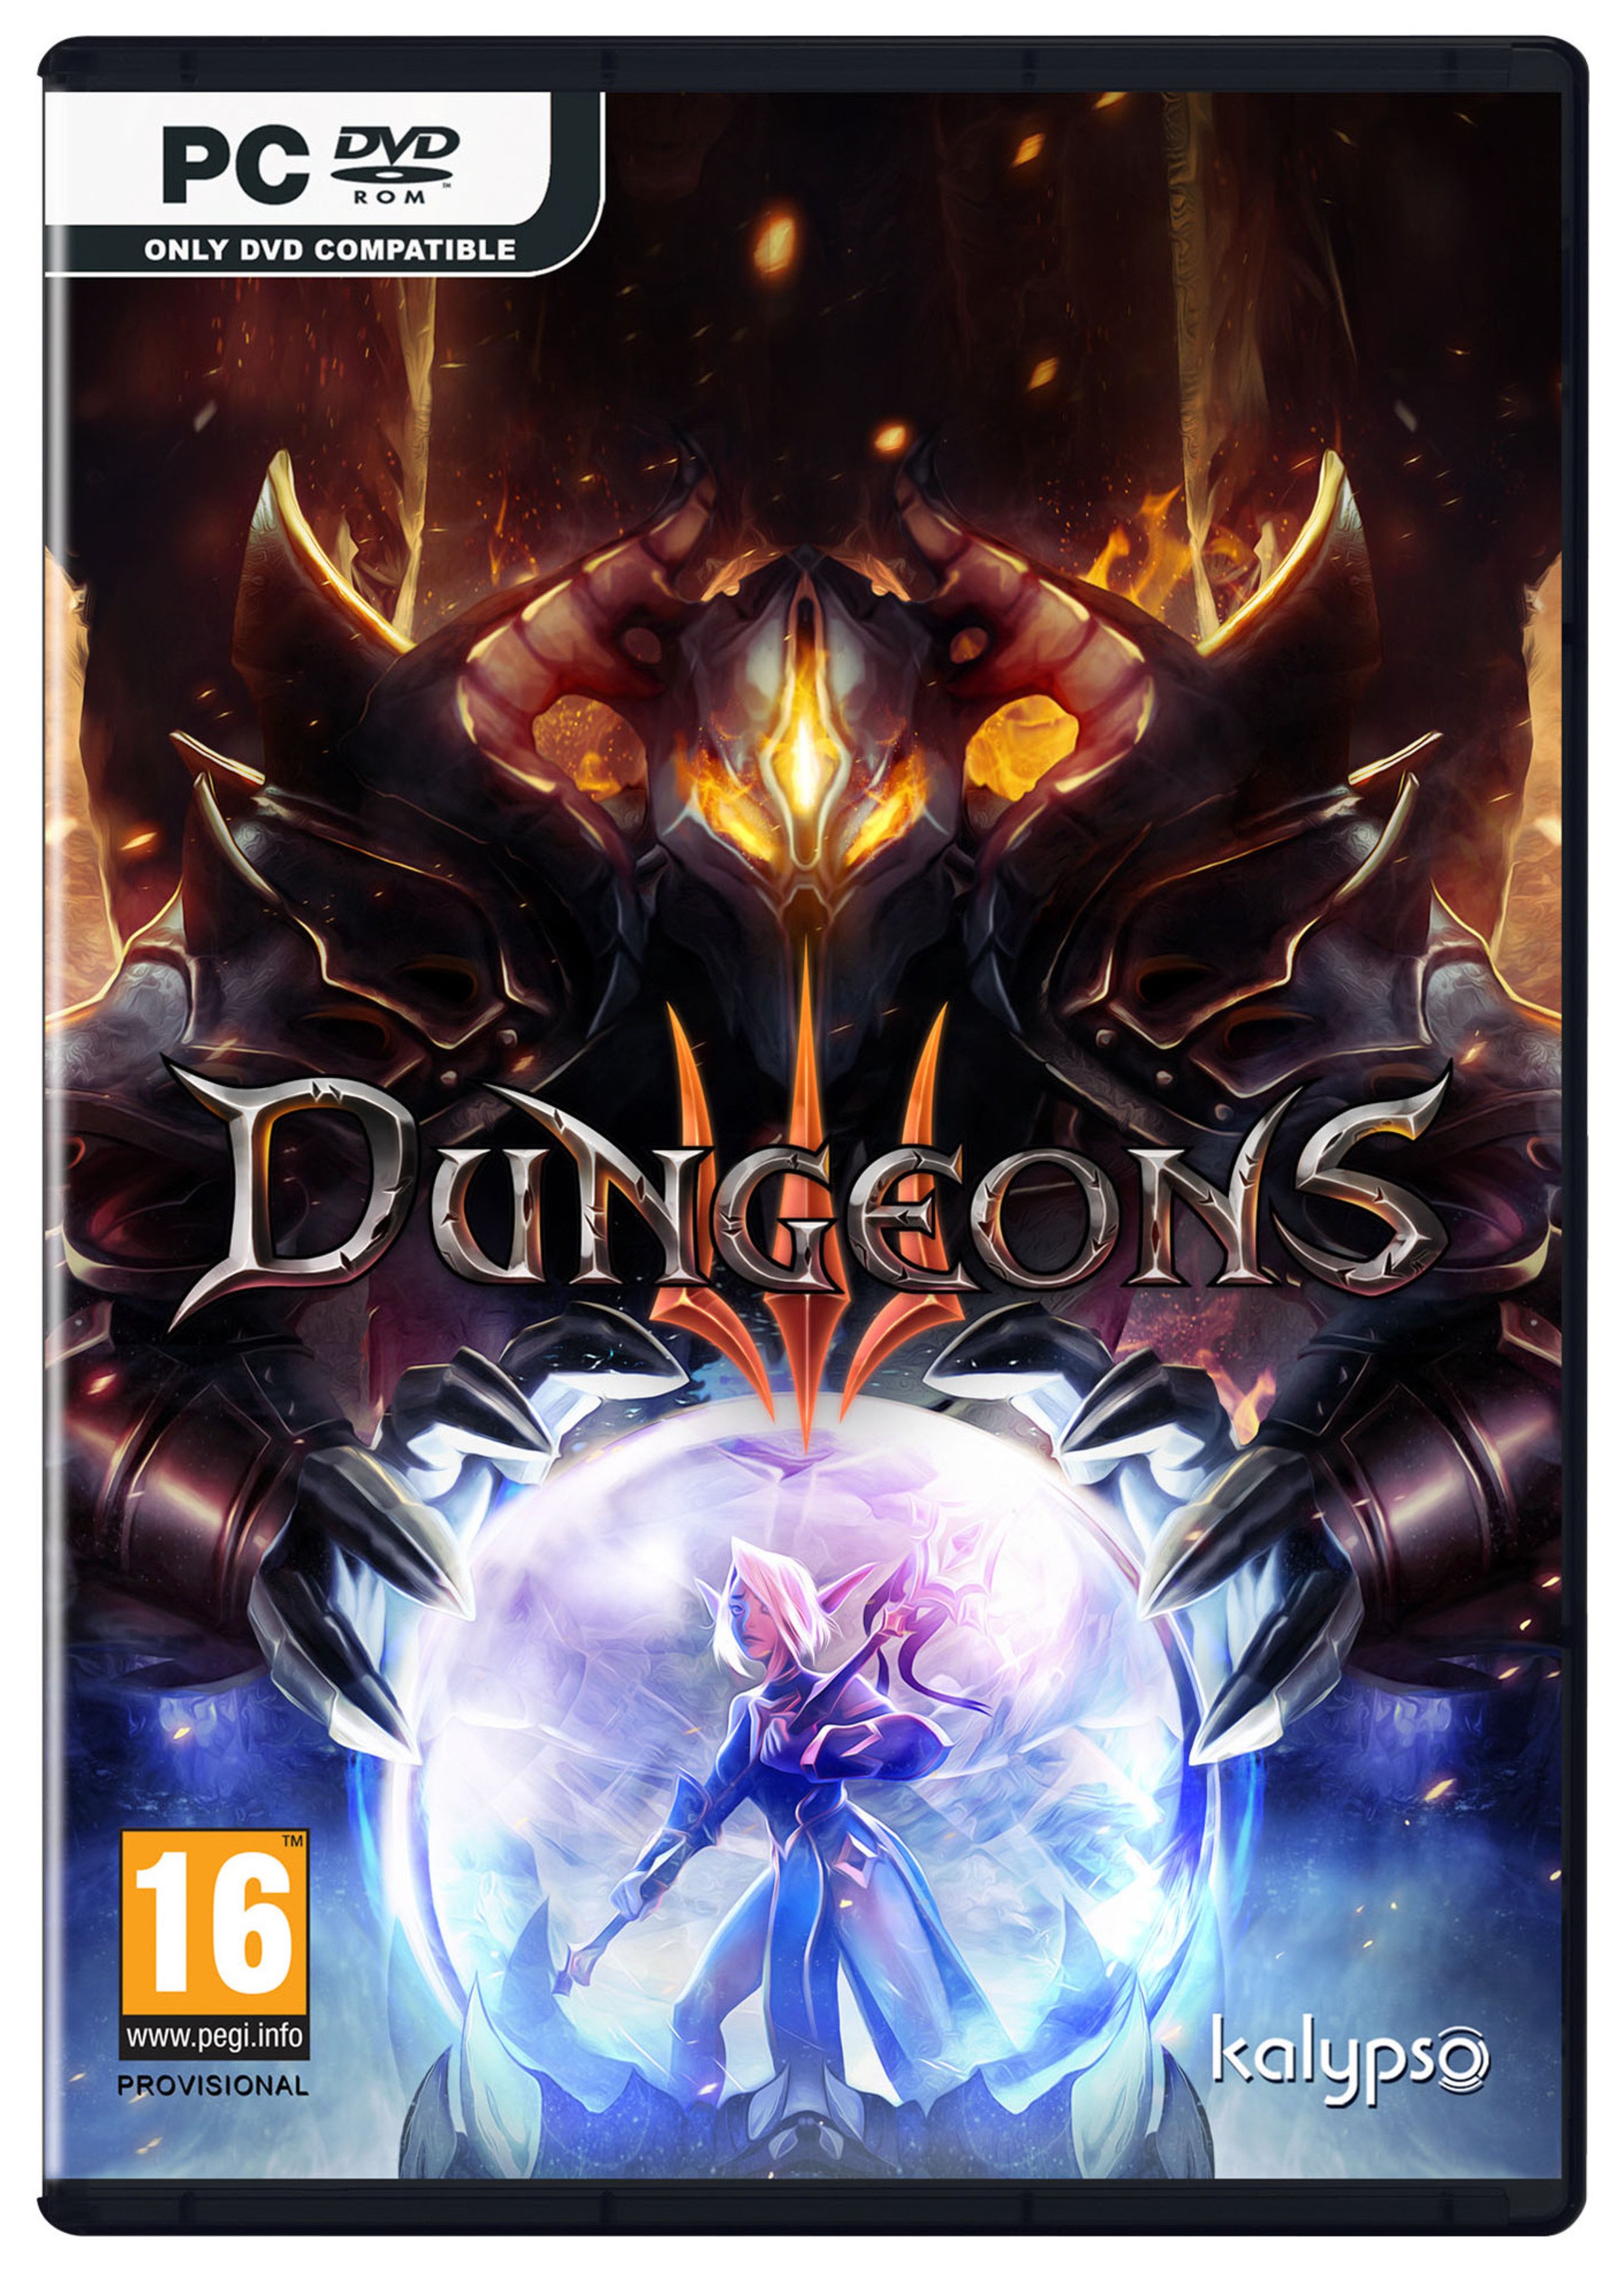 Dungeons 3 PC Game. review